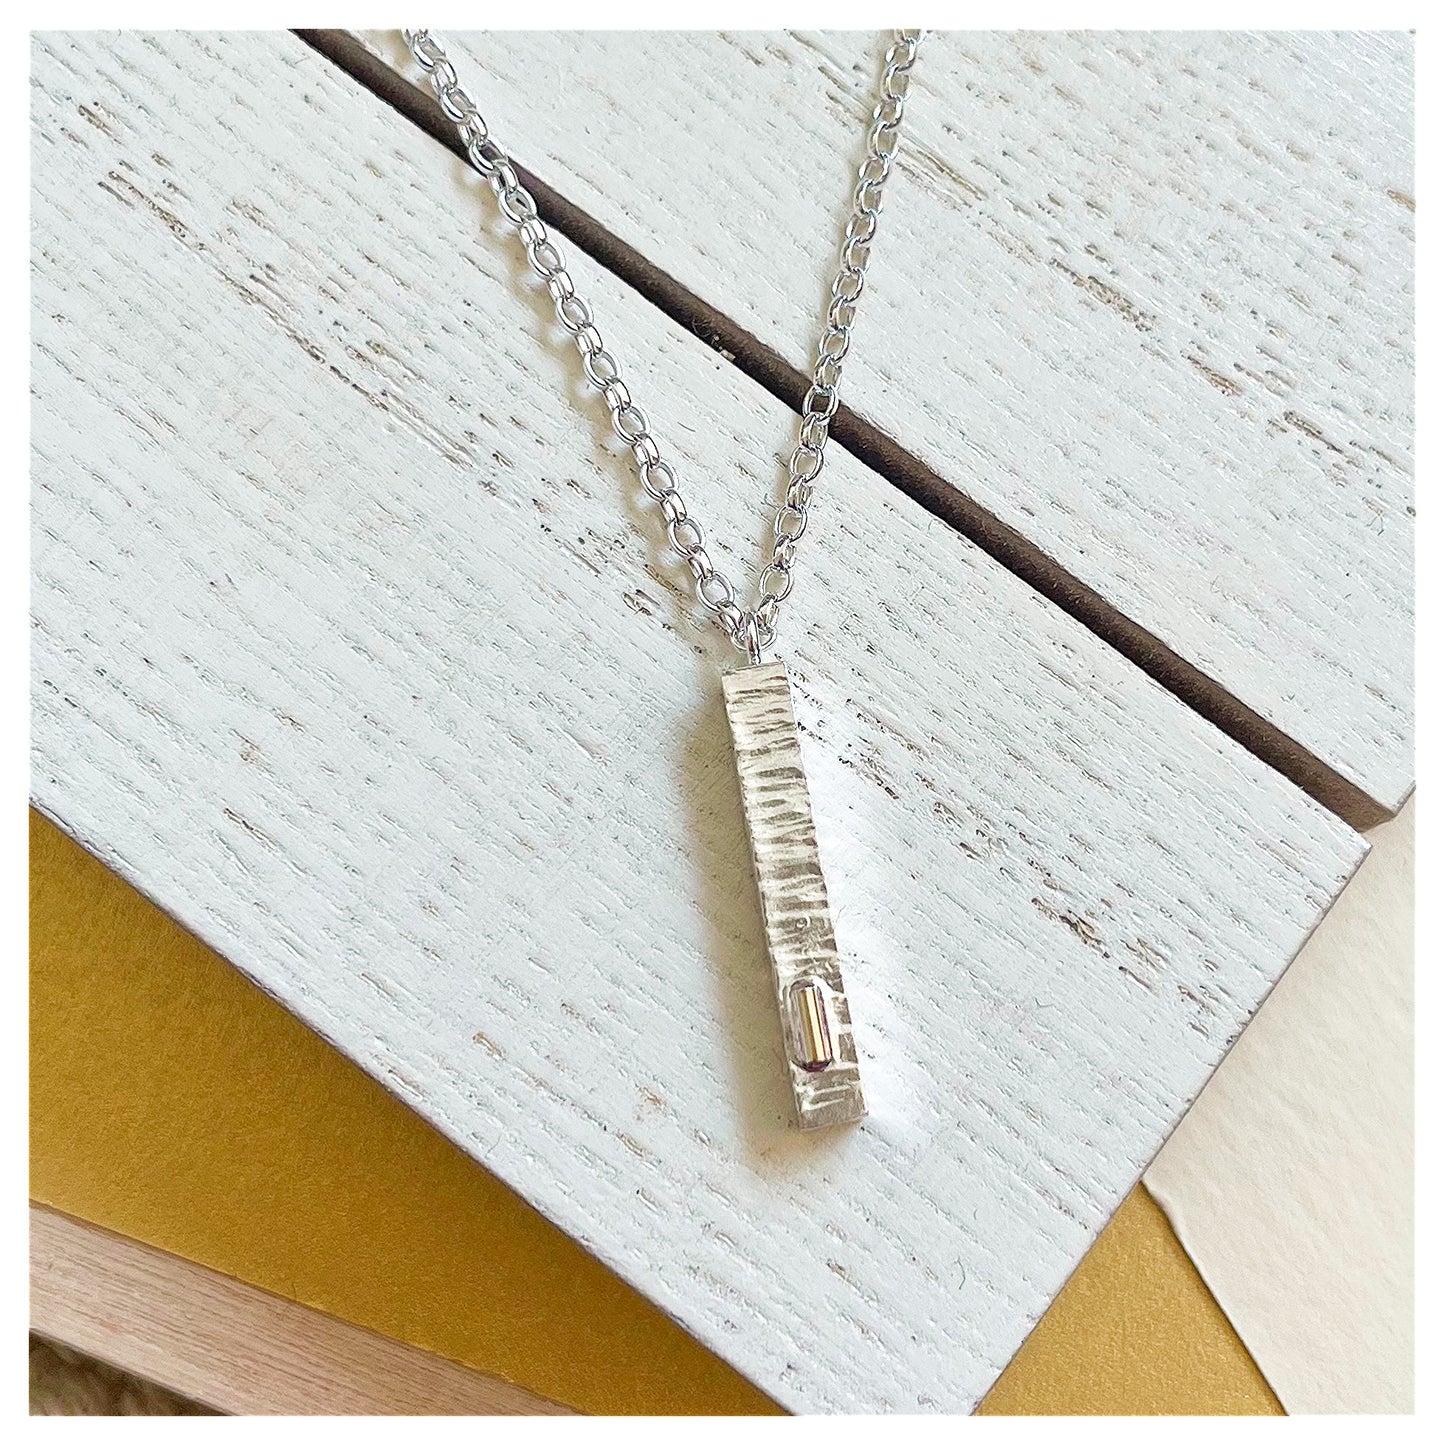 Handmade Sterling Silver and 9ct Yellow Gold Mini Hammered Bar Necklace.